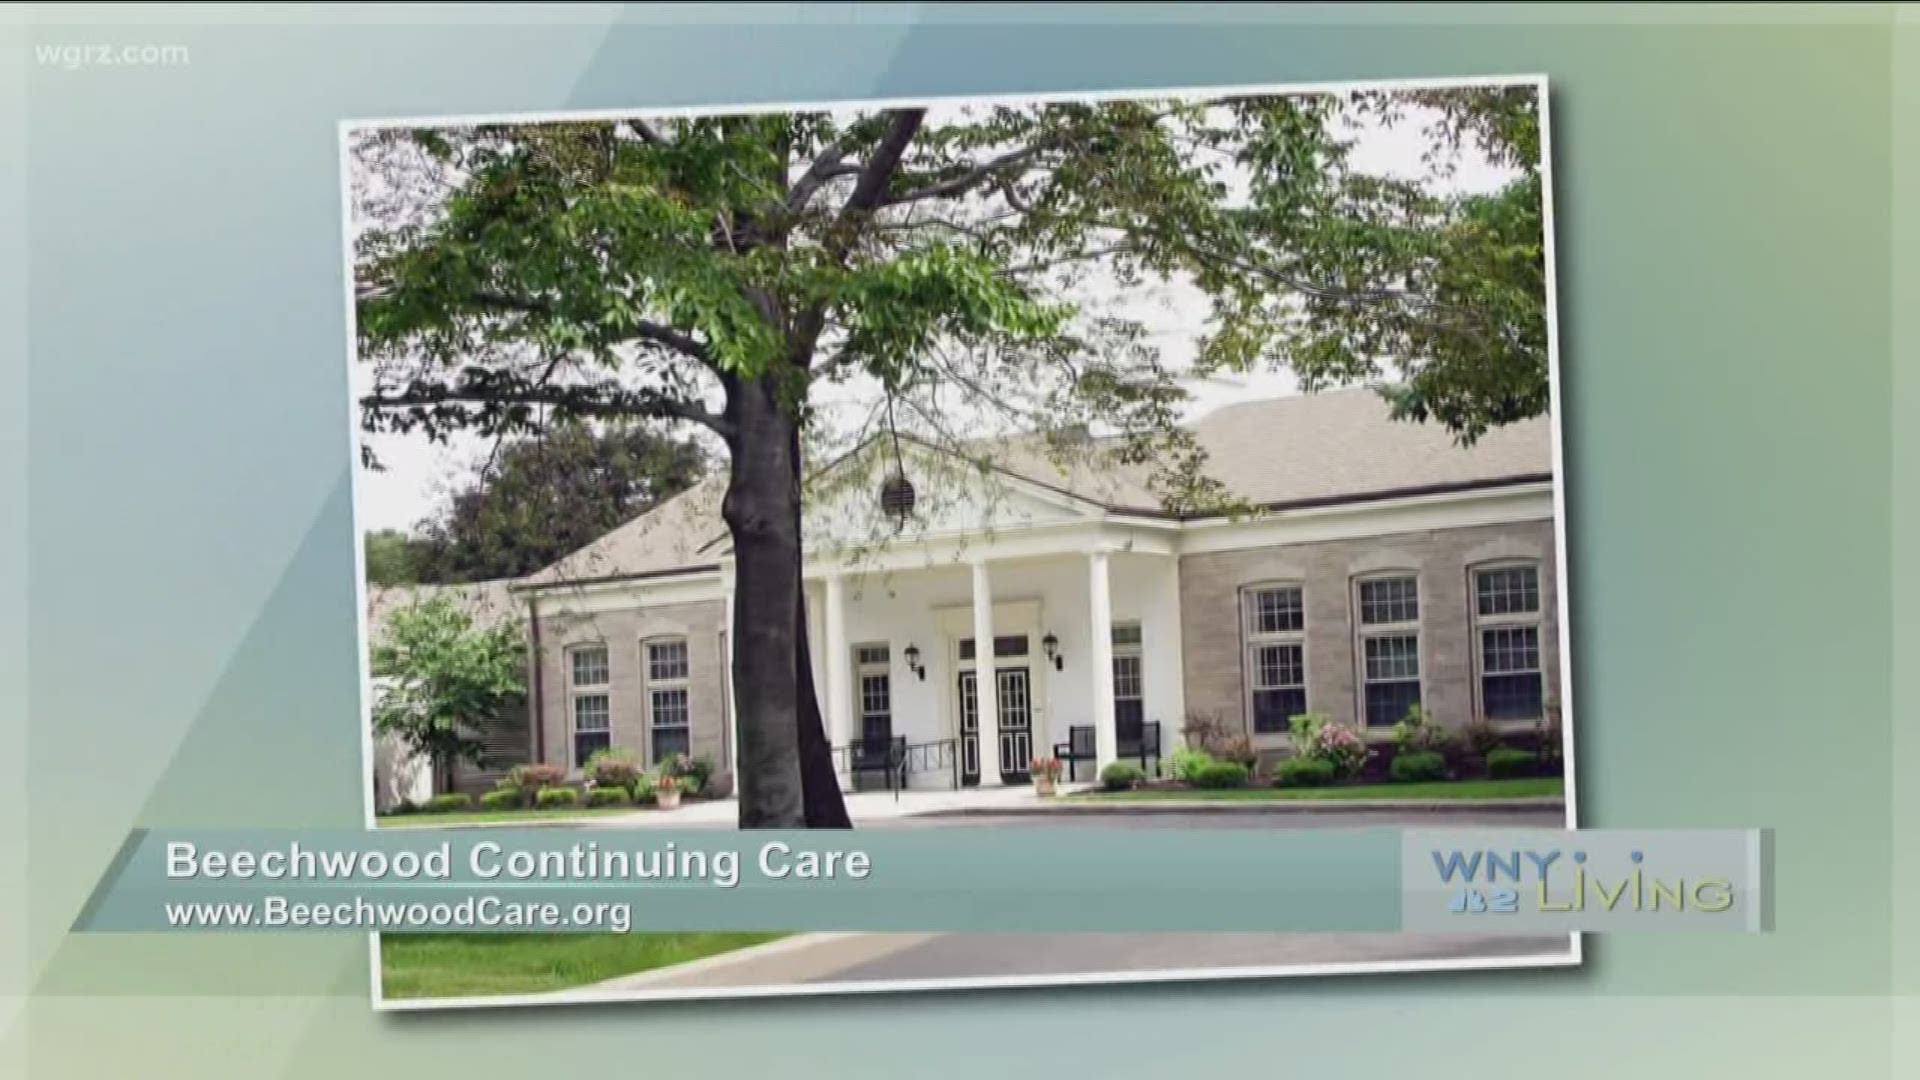 WNY Living - October 12 - Beechwood Continuing Care